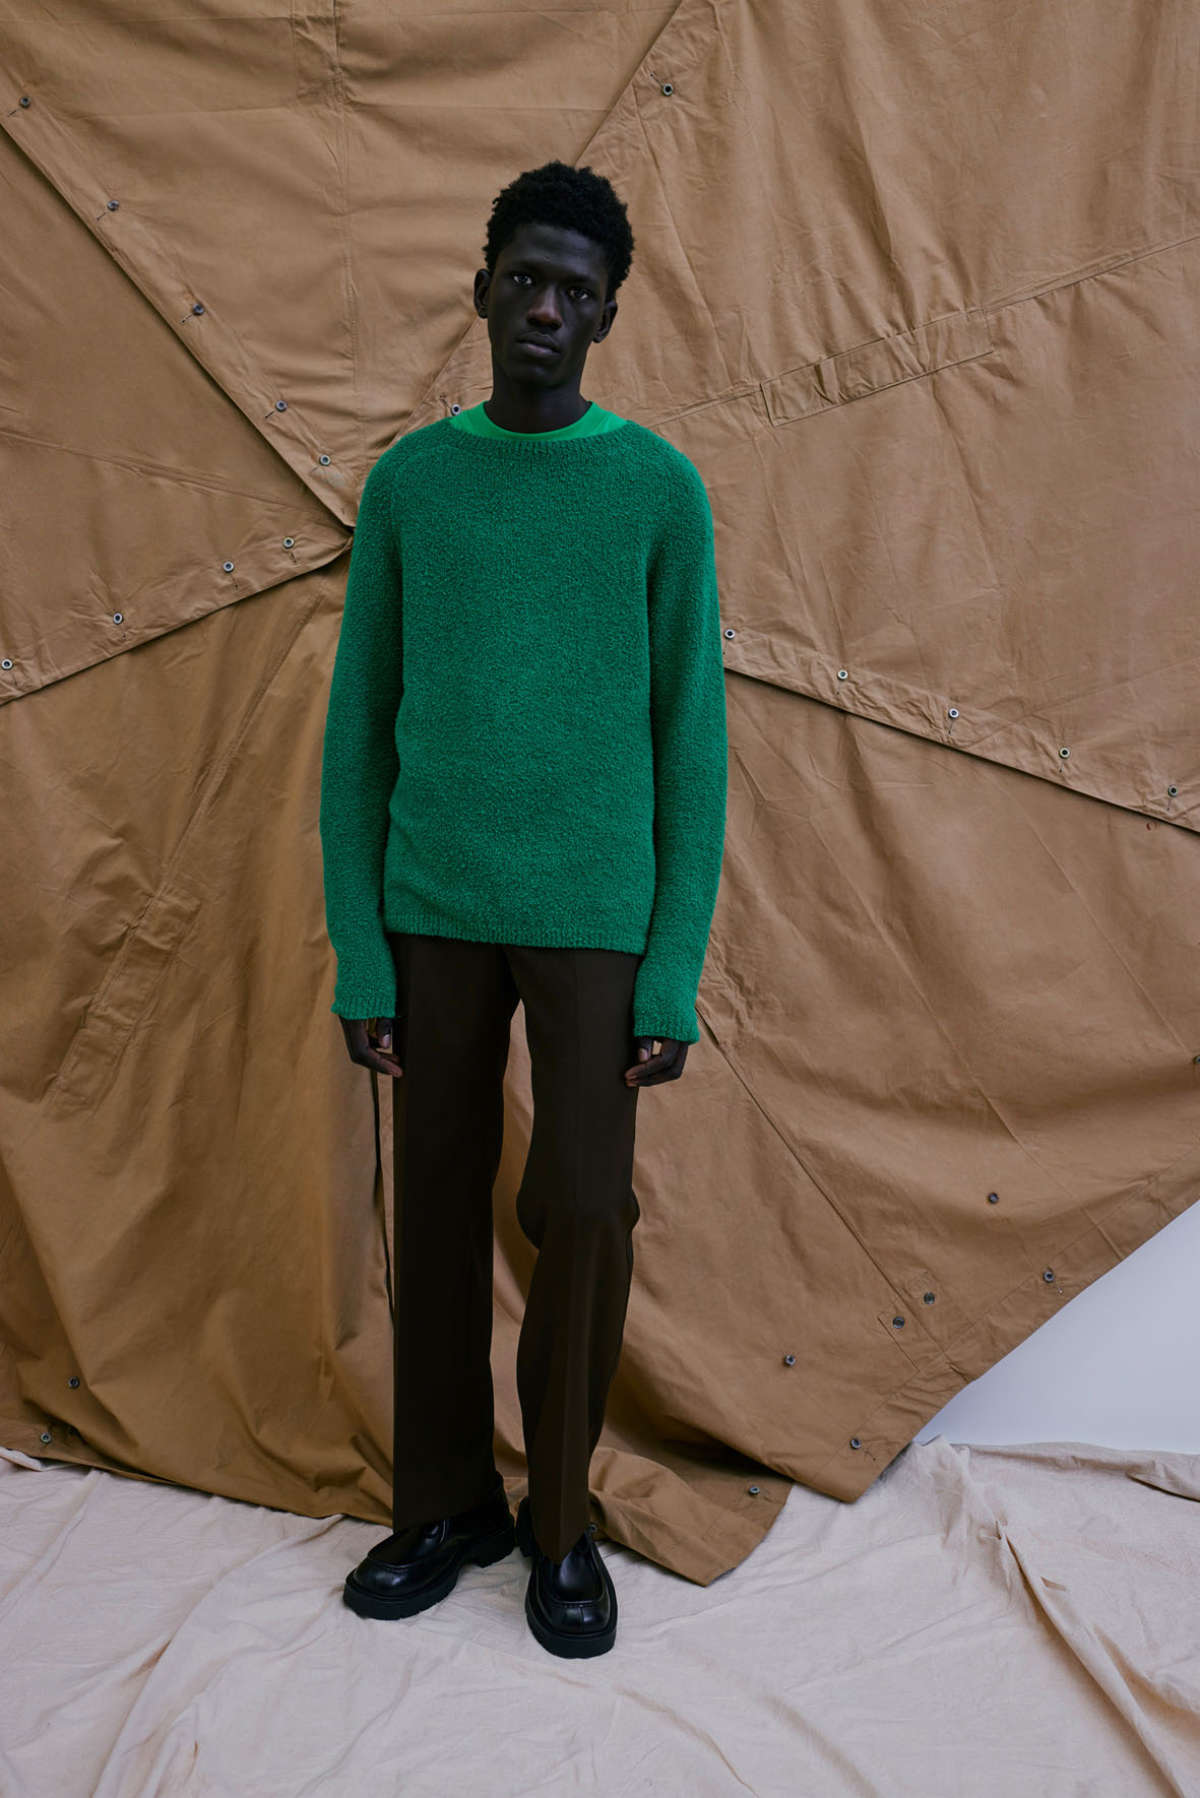 Sandro Presents Its New Fall/Winter 2022 Men Collection